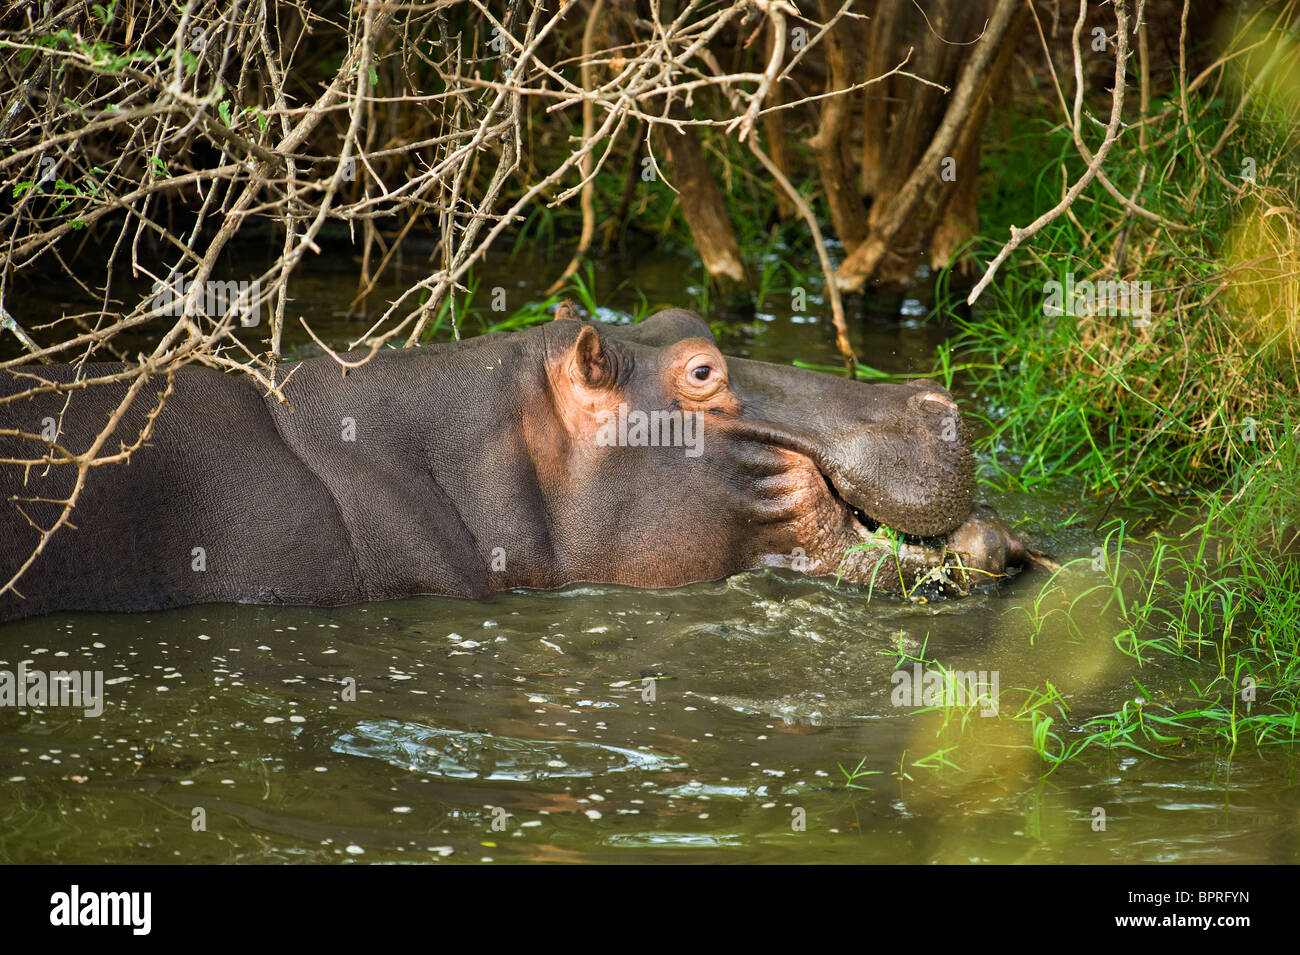 Hippo HIPPOPOTAMUS normally known as a herbivore is chewing on meat (!) an antilope impala cadaver snatched from the crocodile Stock Photo